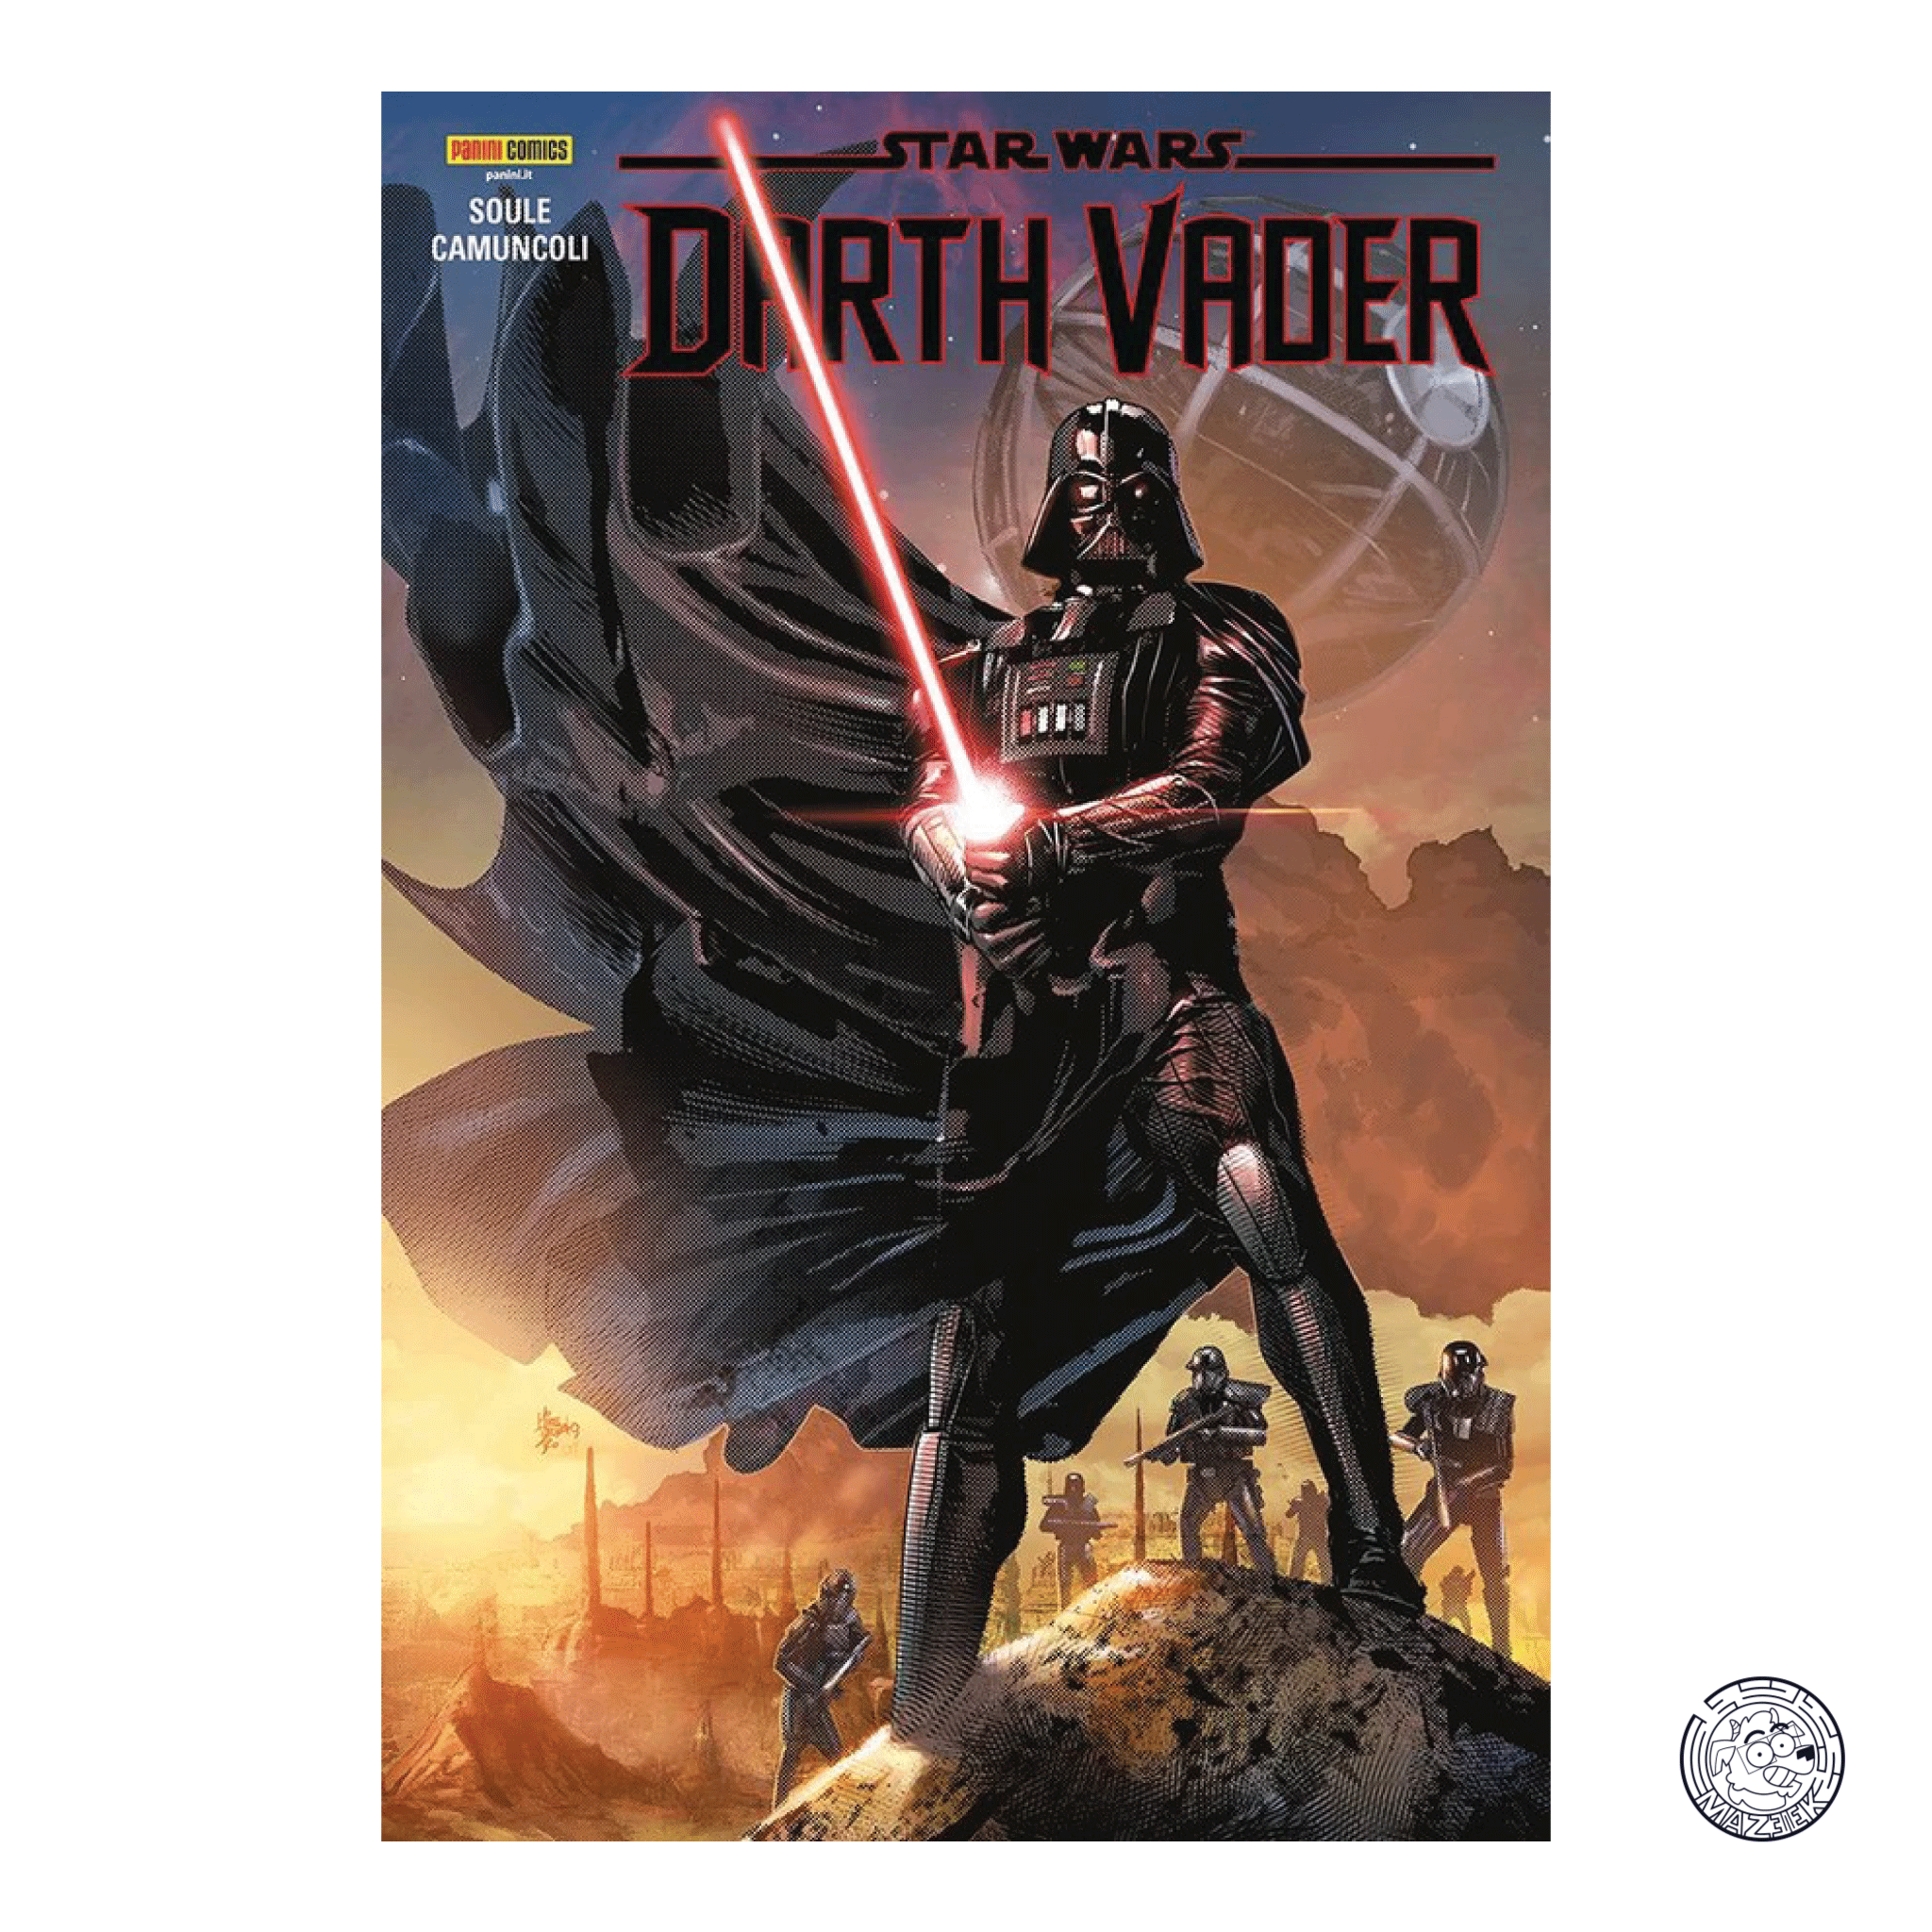 Darth Vader – The Dark Lord of the Sith